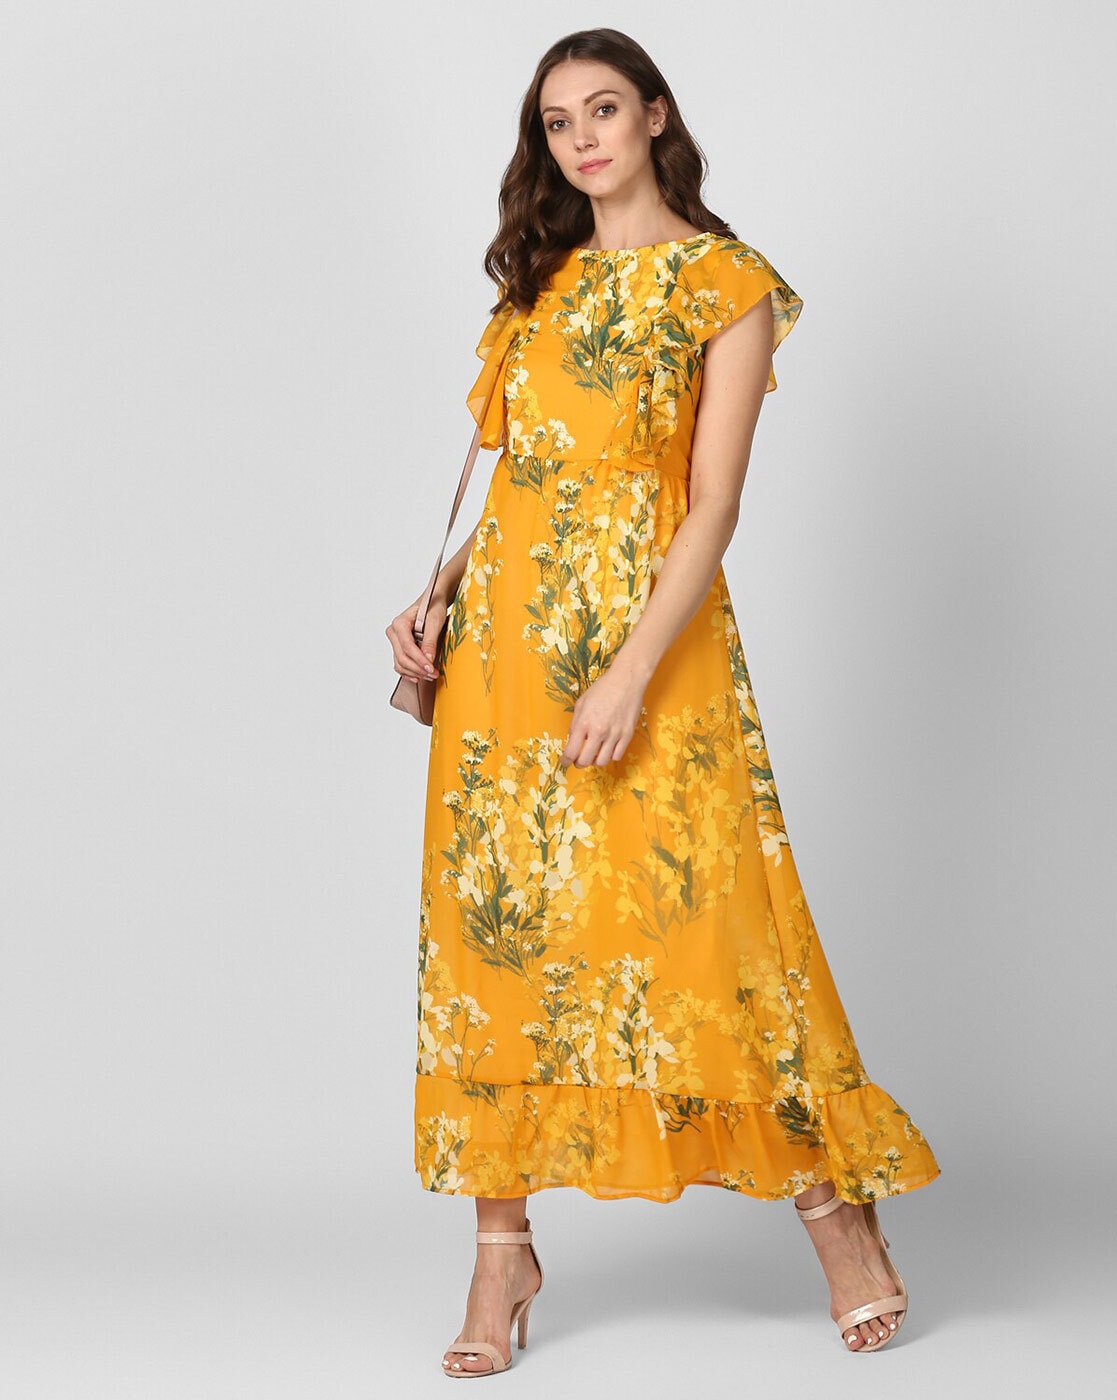 Blue And Yellow Floral Dress Discount Shopping, Save 54% | idiomas.to ...